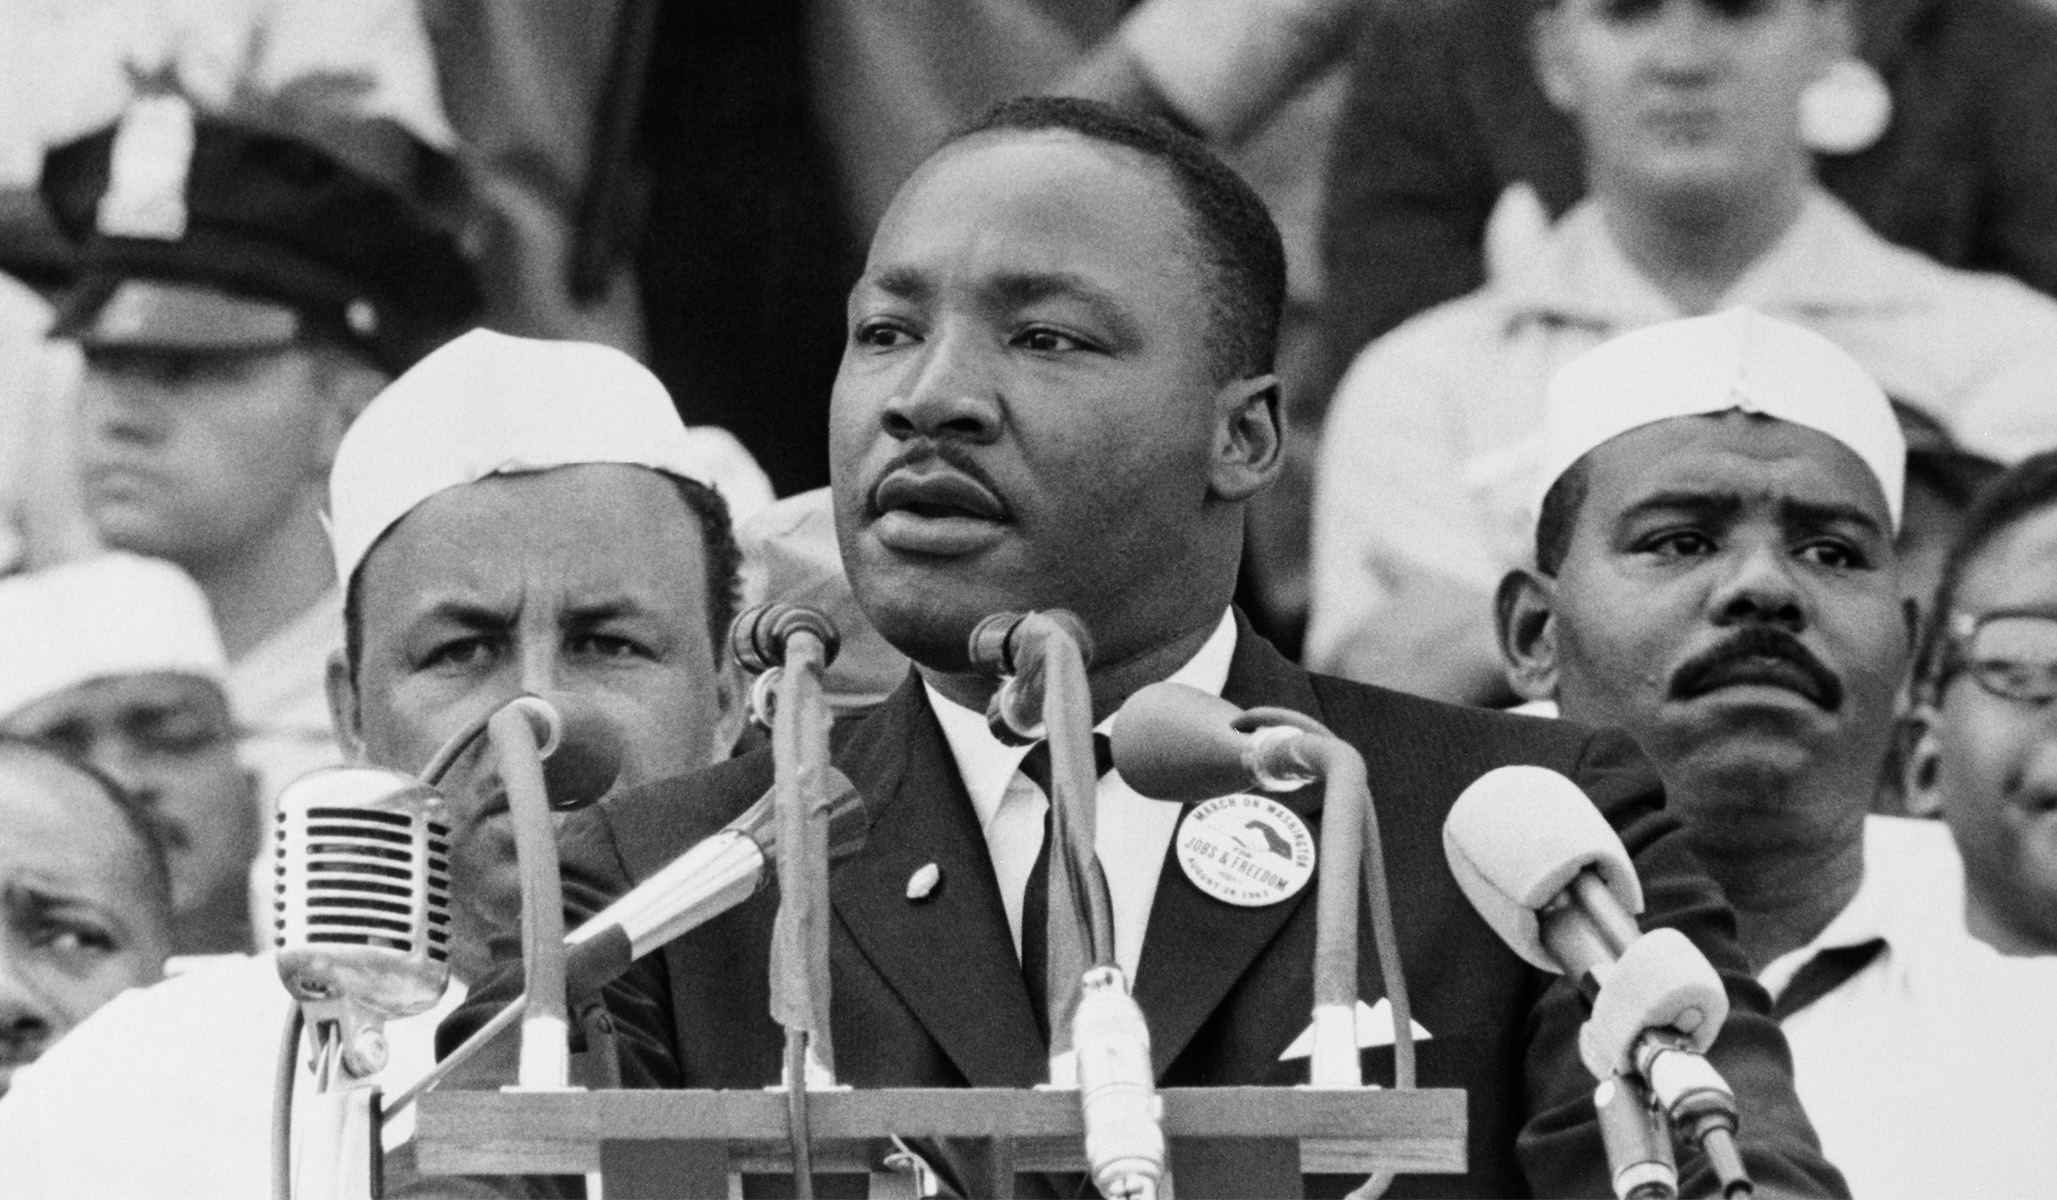 Why We Celebrate Martin Luther King Jr.